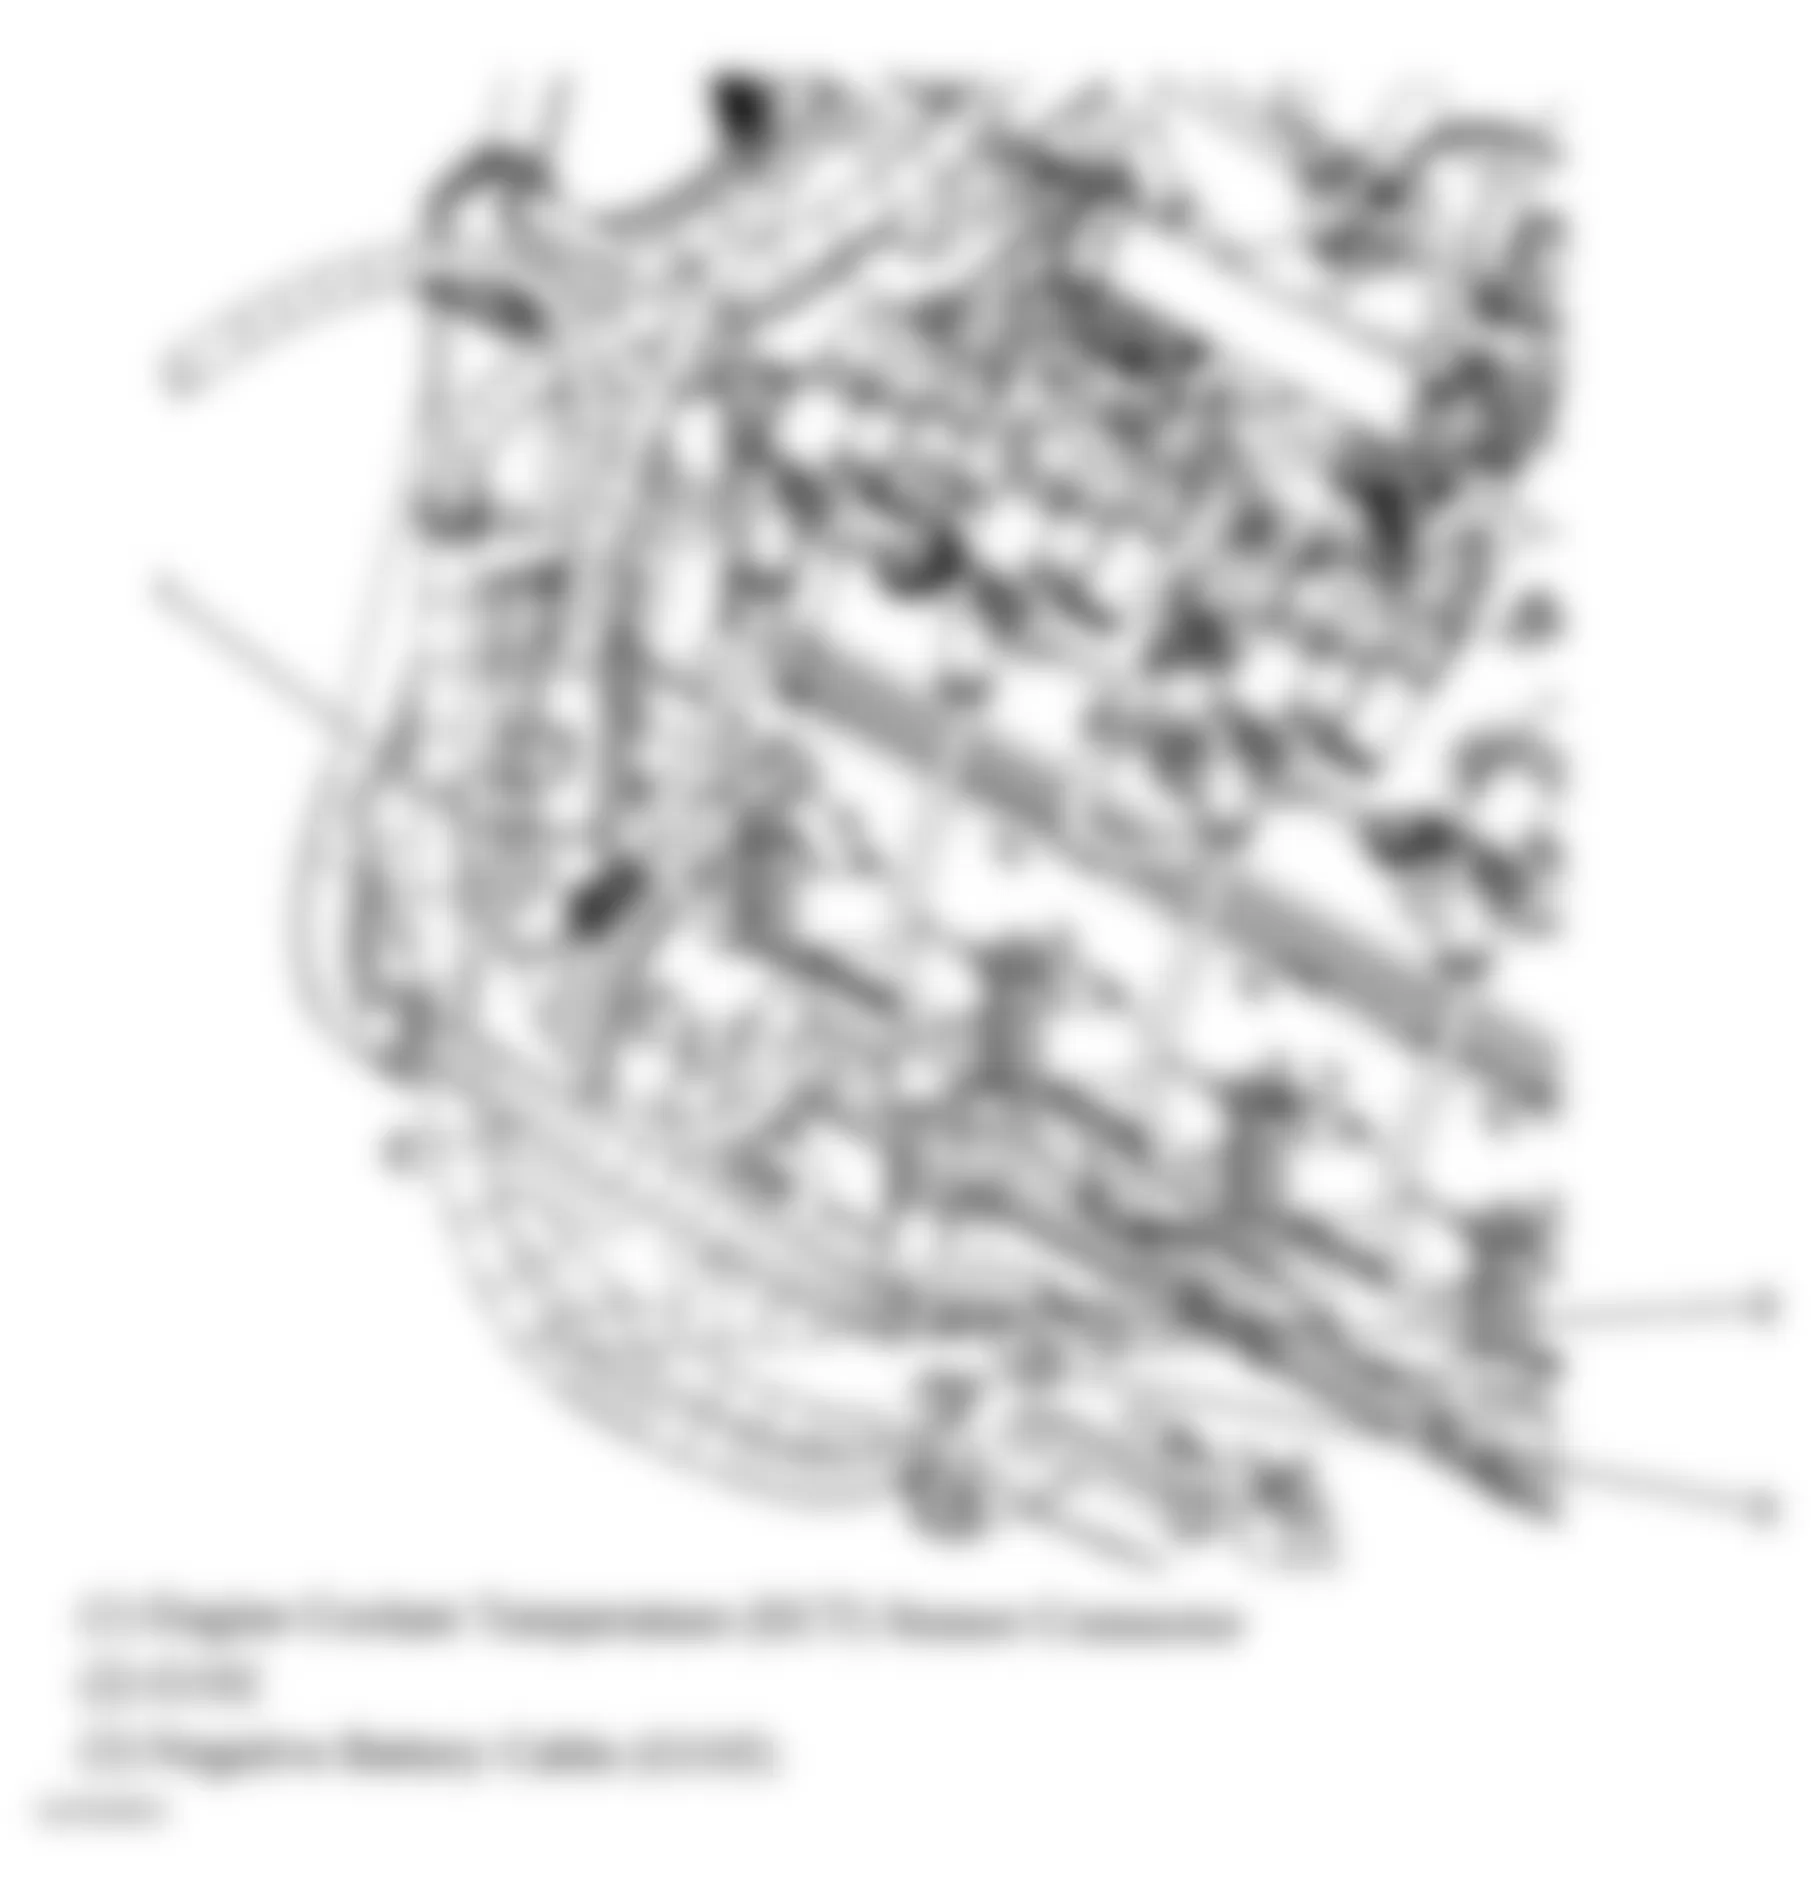 GMC Sierra 1500 2004 - Component Locations -  Lower Left Side Of Engine (4.8L, 5.3L & 6.0L)